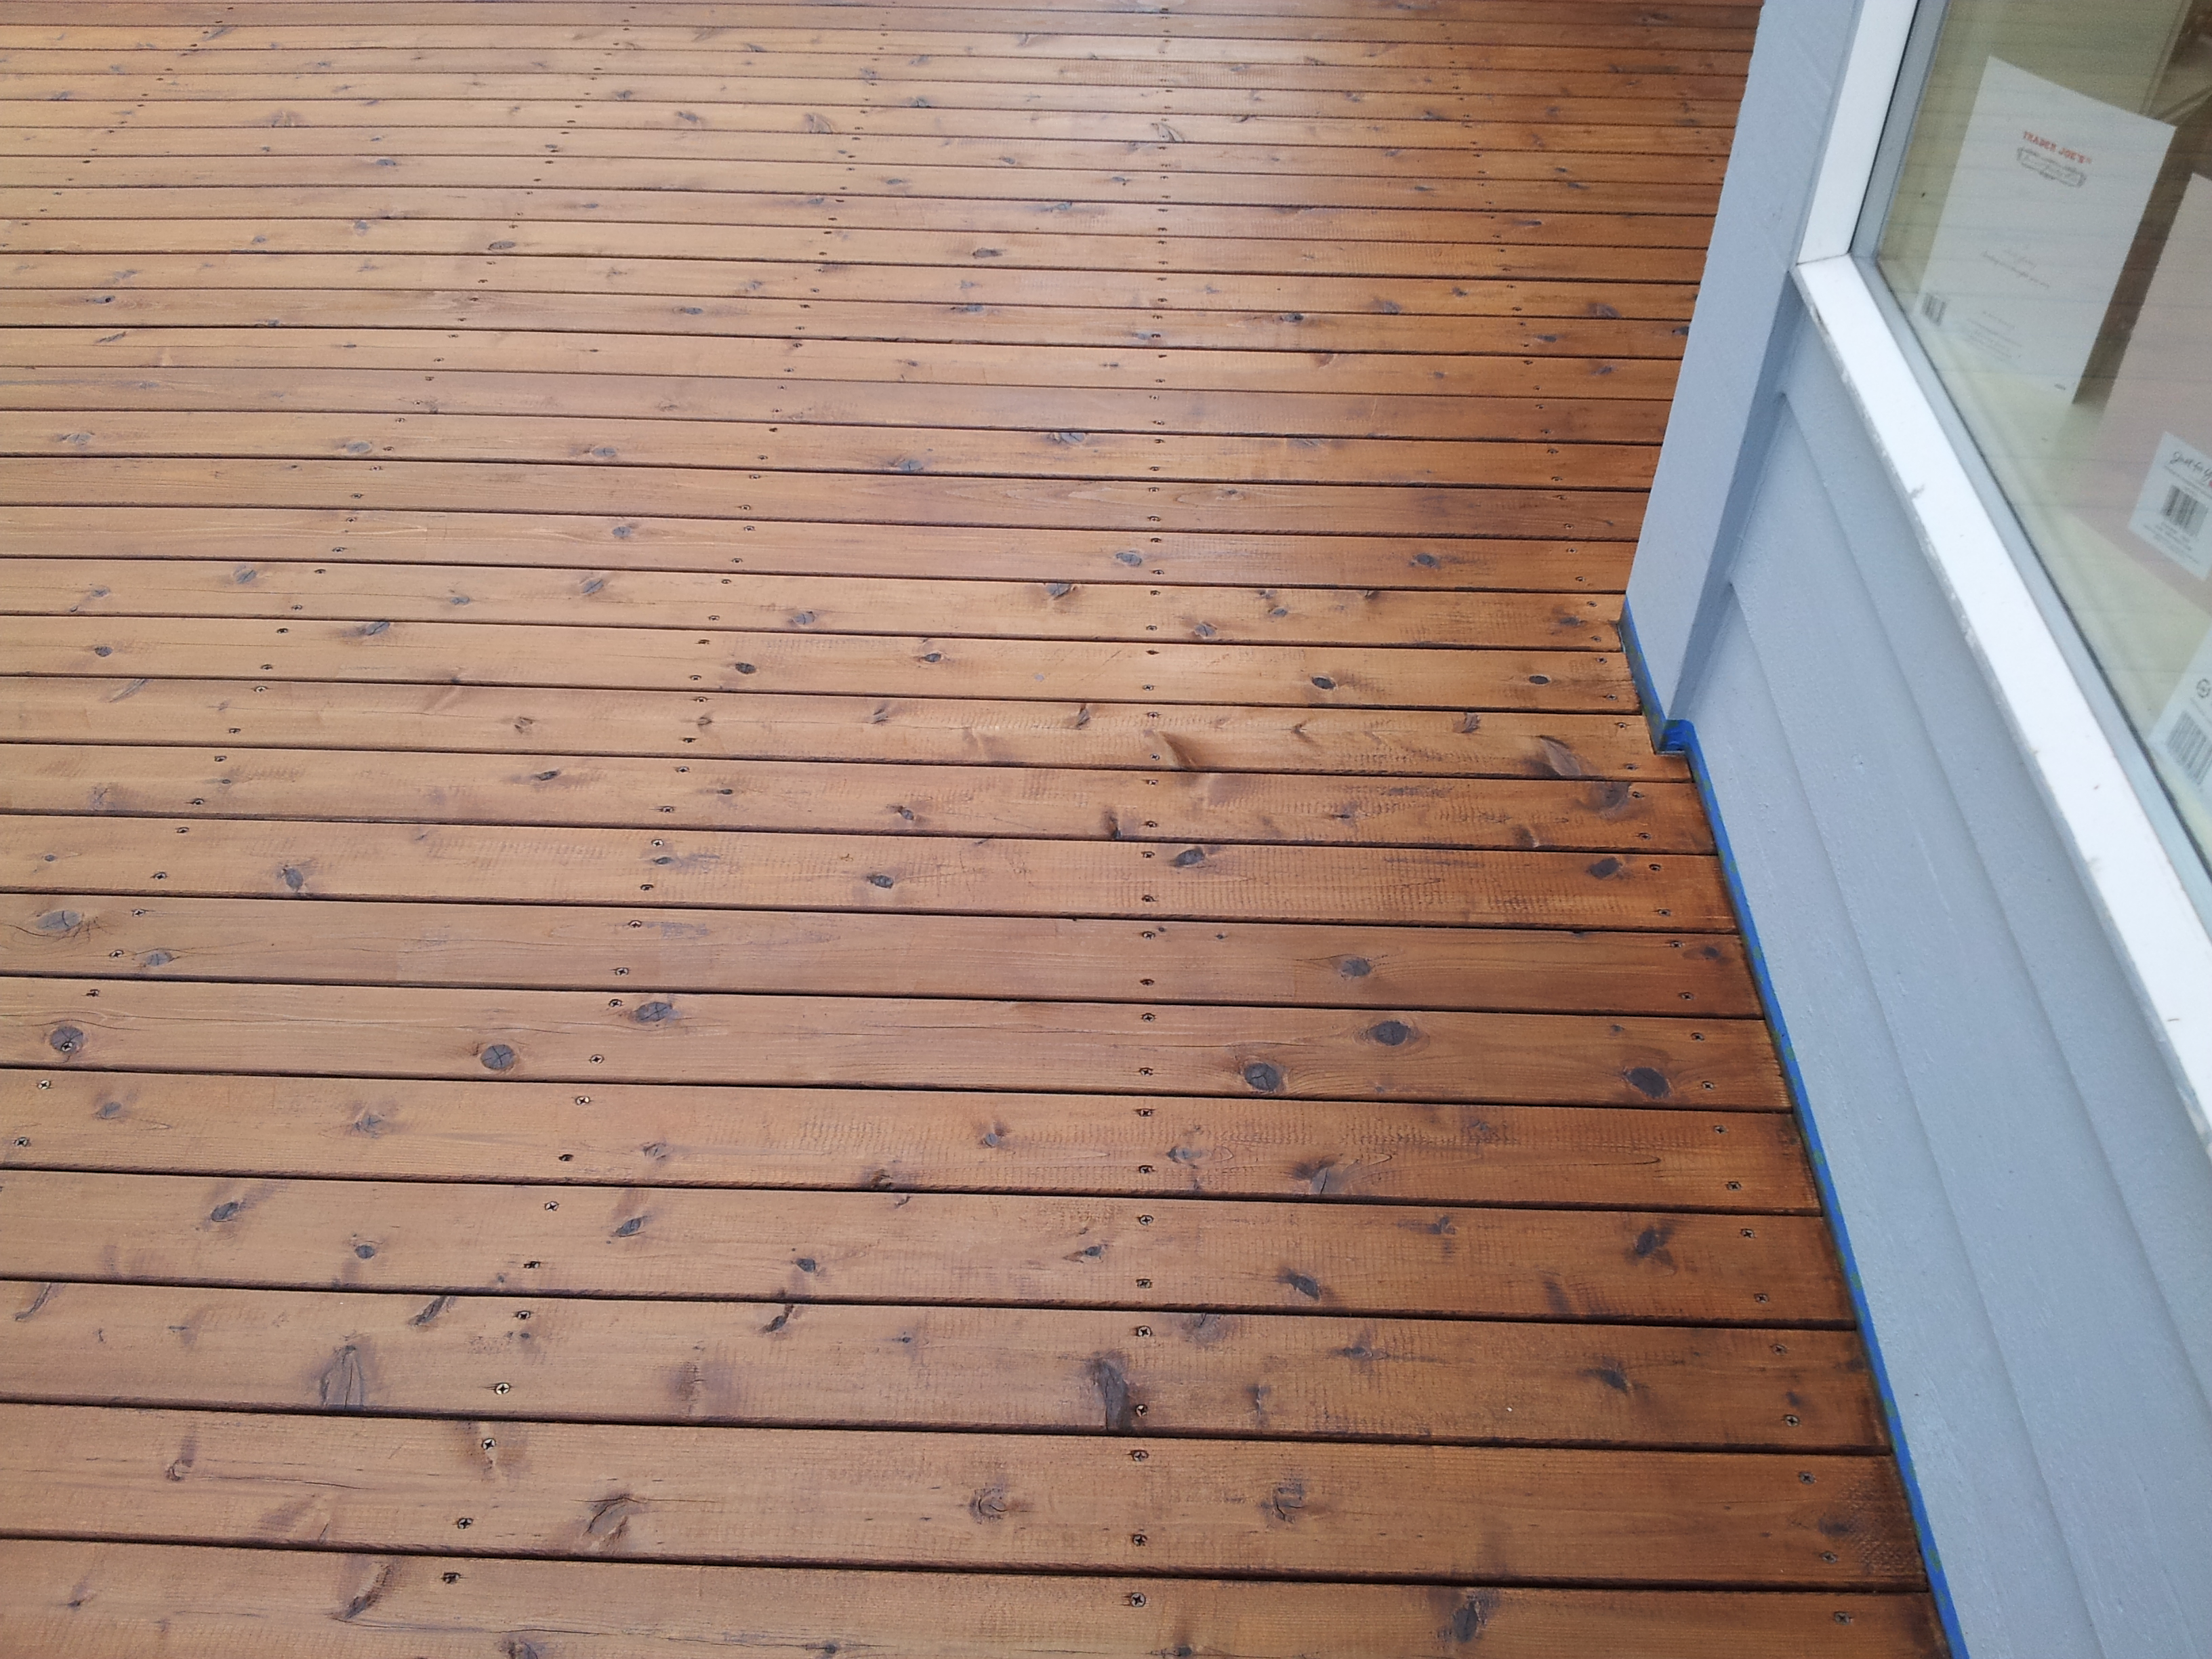 Oil Based Deck Stains Best Deck Stain Reviews Ratings with size 3264 X 2448